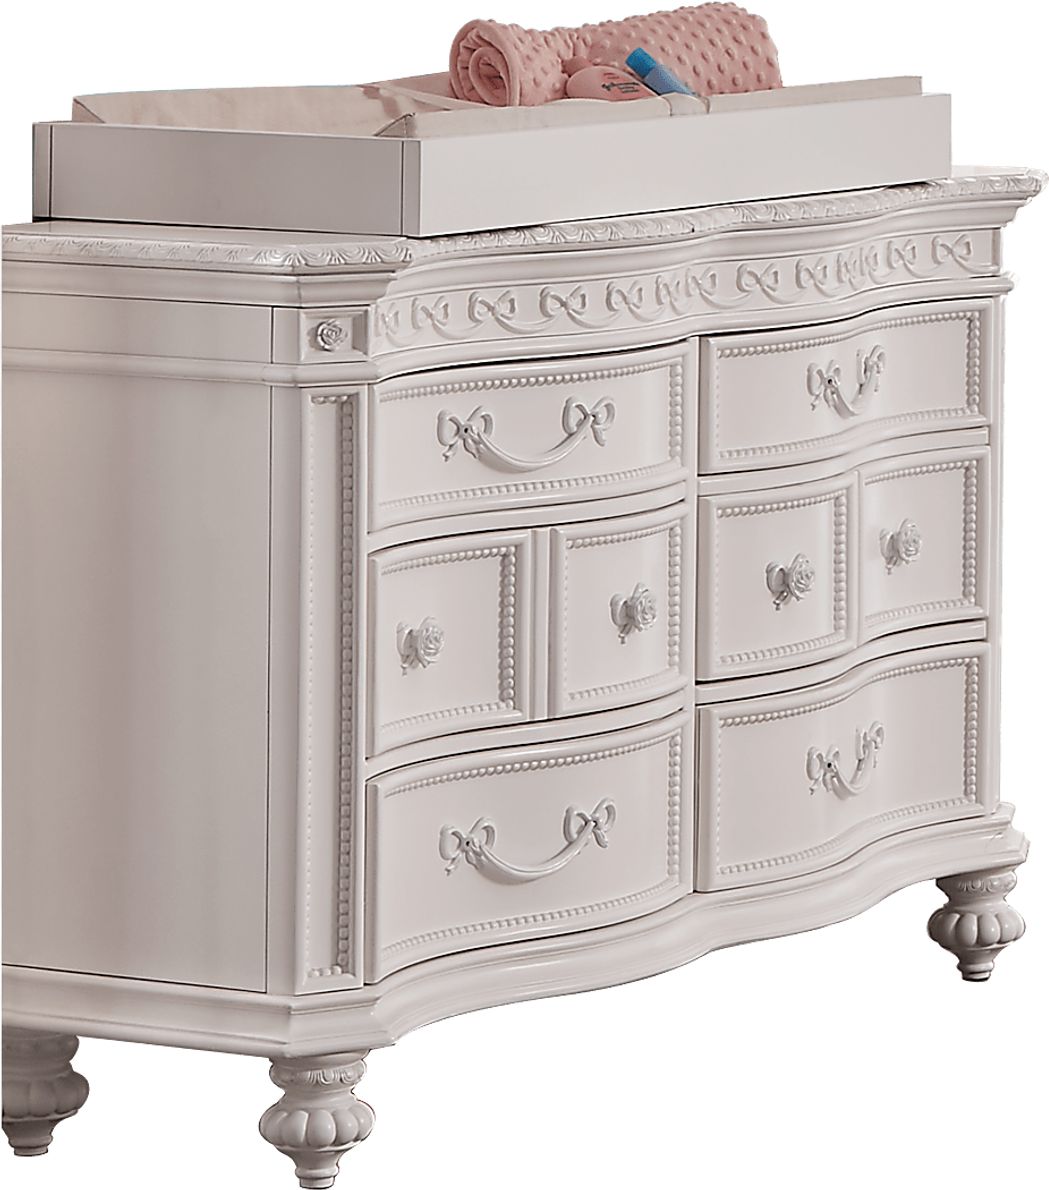 Disney Princess Fairytale White 6 Drawer Dresser with Changing Topper and Pad